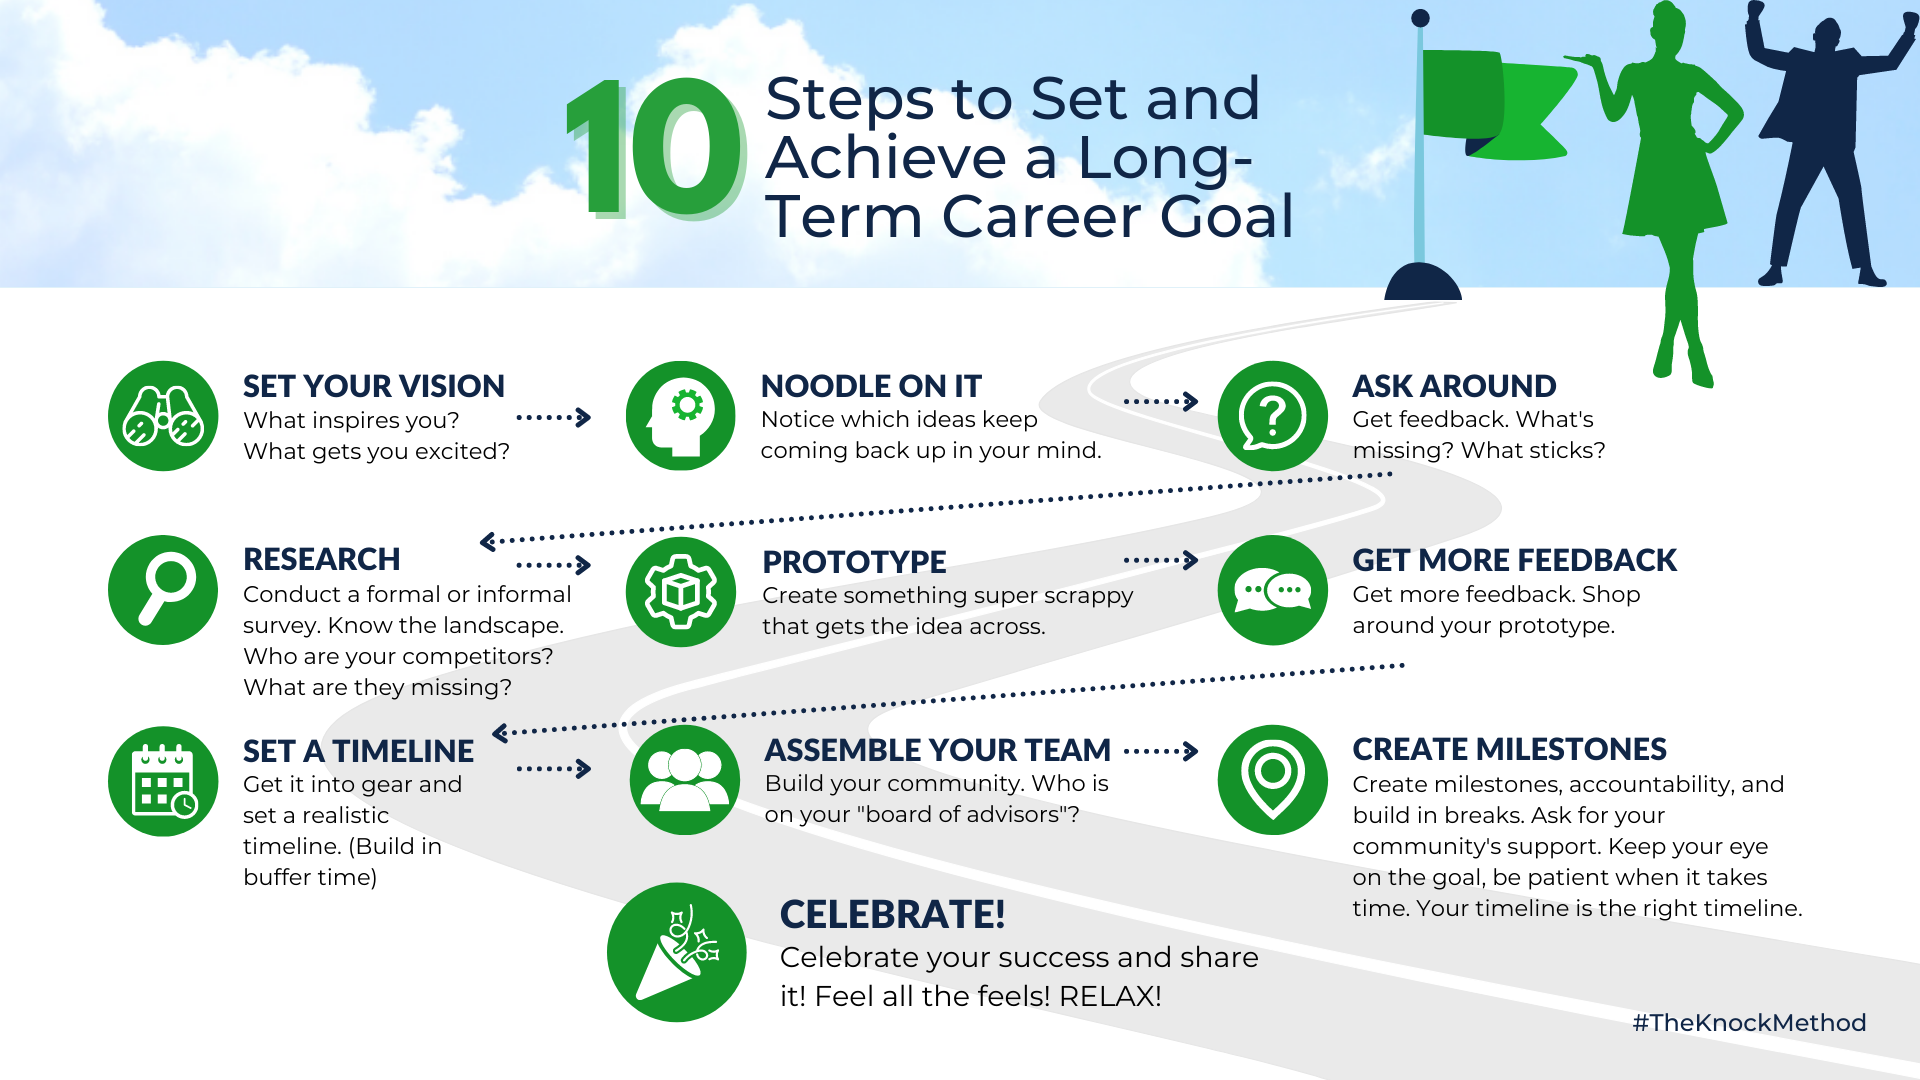 10 Steps to Set and Achieve a Long-Term Career Goal